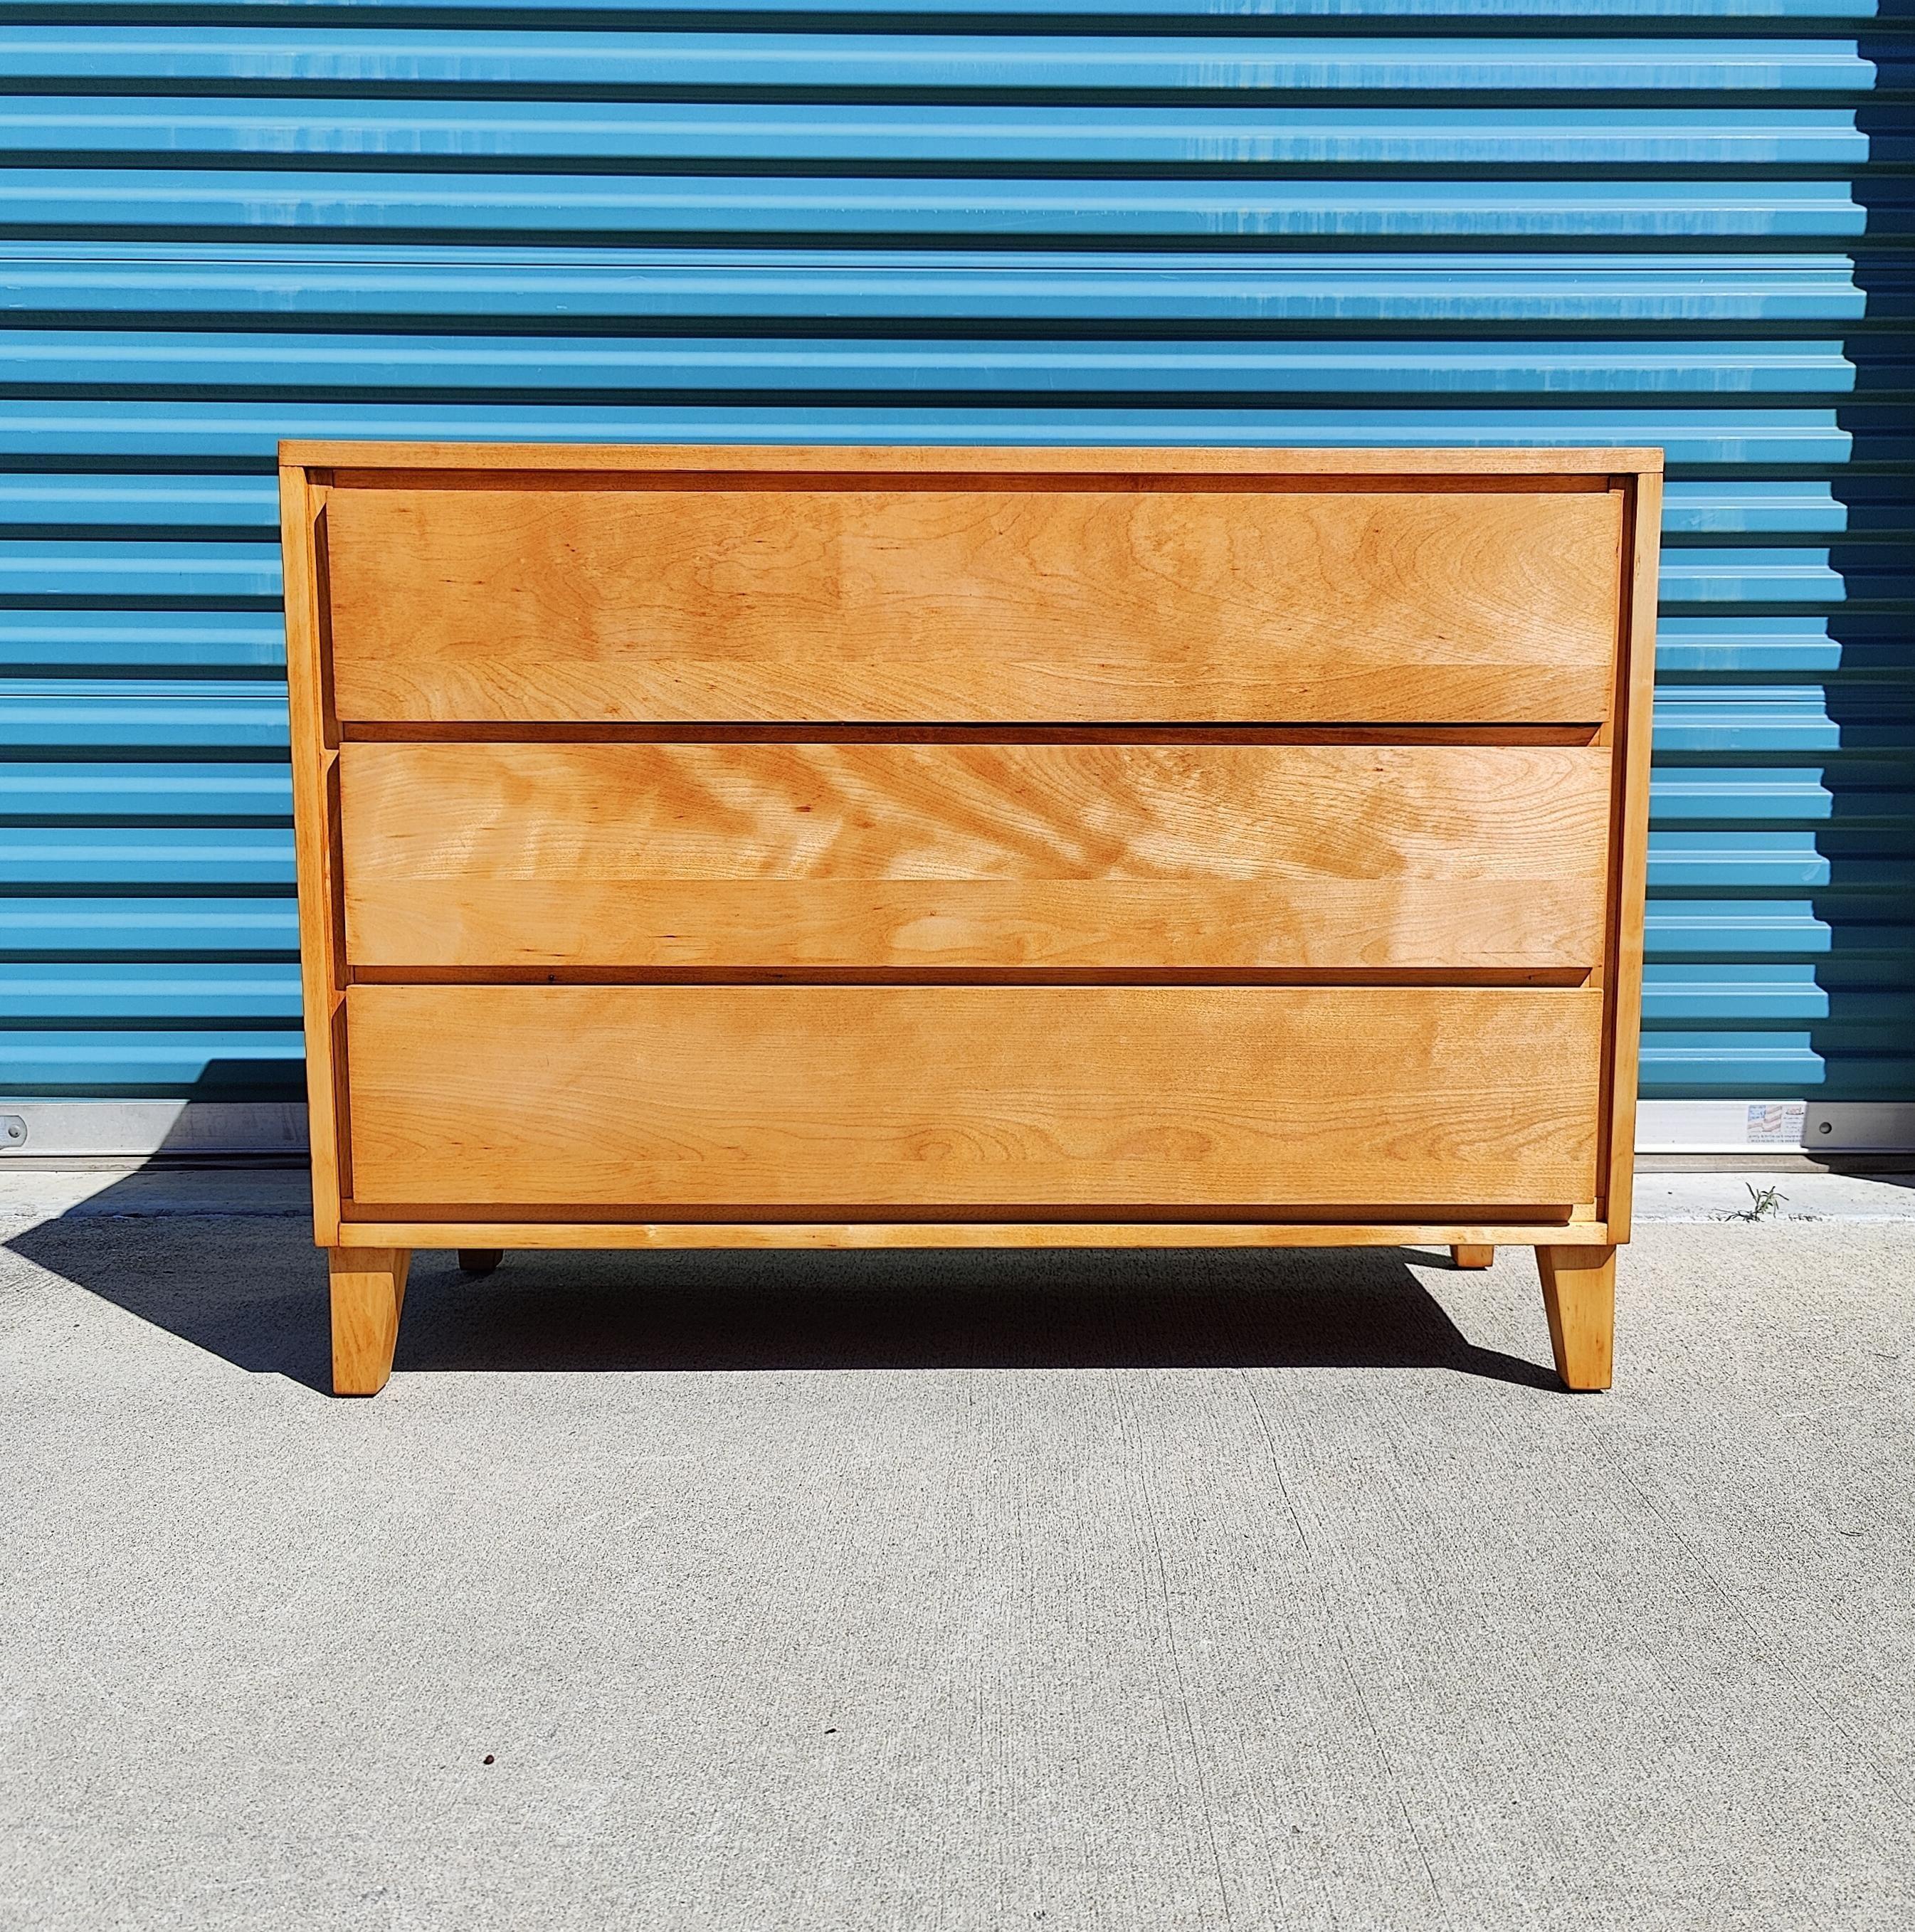 Now available is an amazing solid birch chest of drawers/dresser by Leslie Diamond for Conant Ball. Overall in great condition as it received a frame refinish. This piece measures approximately 42w x 18.5d x 30.25t. Truly a timeless piece, simple